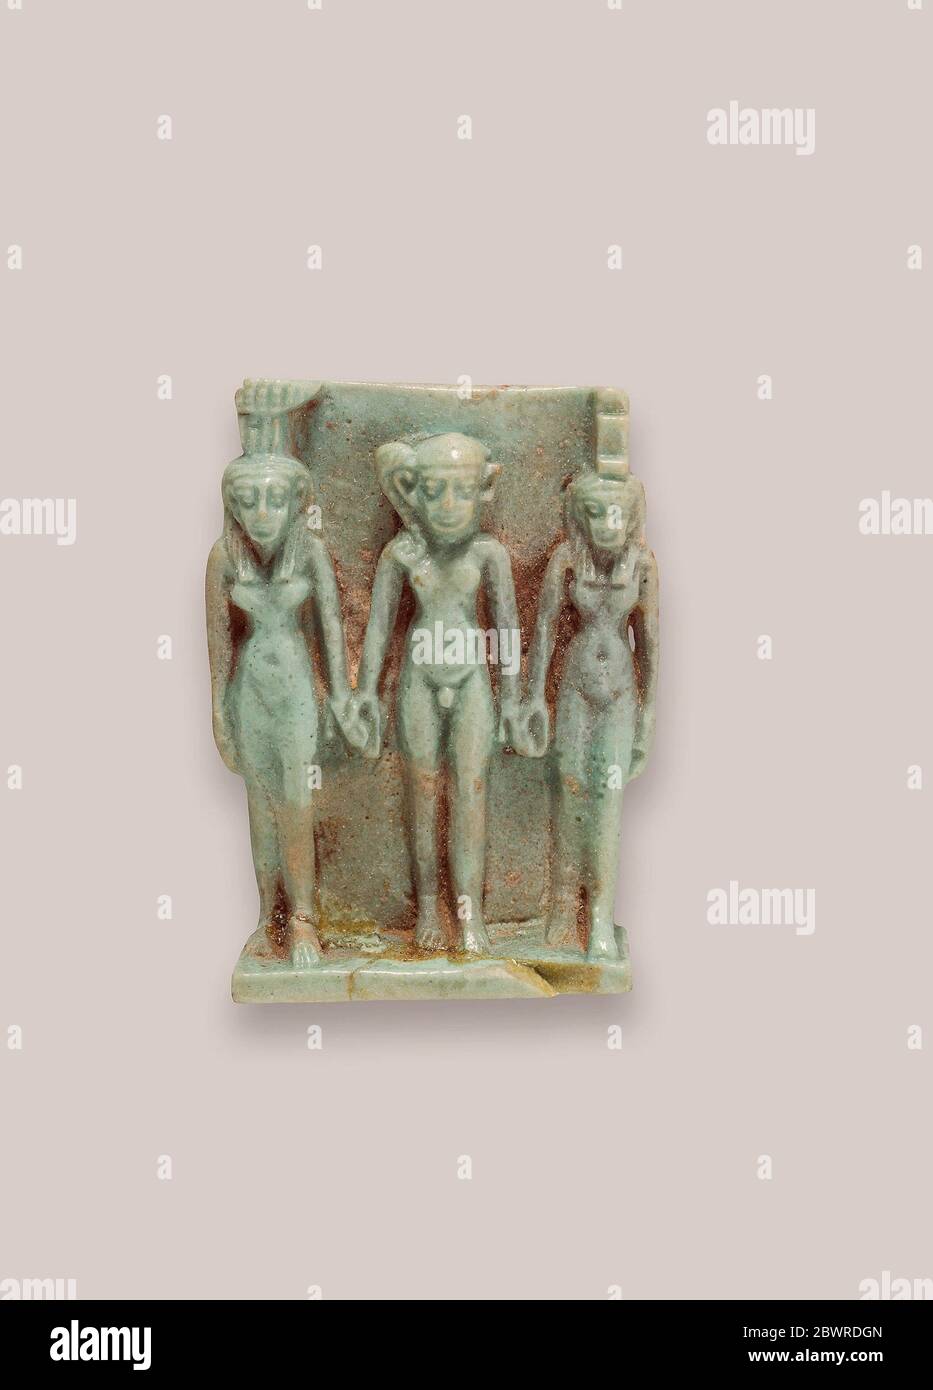 Author: Ancient Egyptian. Amulet of Nephthys, Horus the Child, and Isis - Late Period, Dynasty 26 (664'525 BC) - Egyptian. Faience. 664 BC'525 BC. Stock Photo